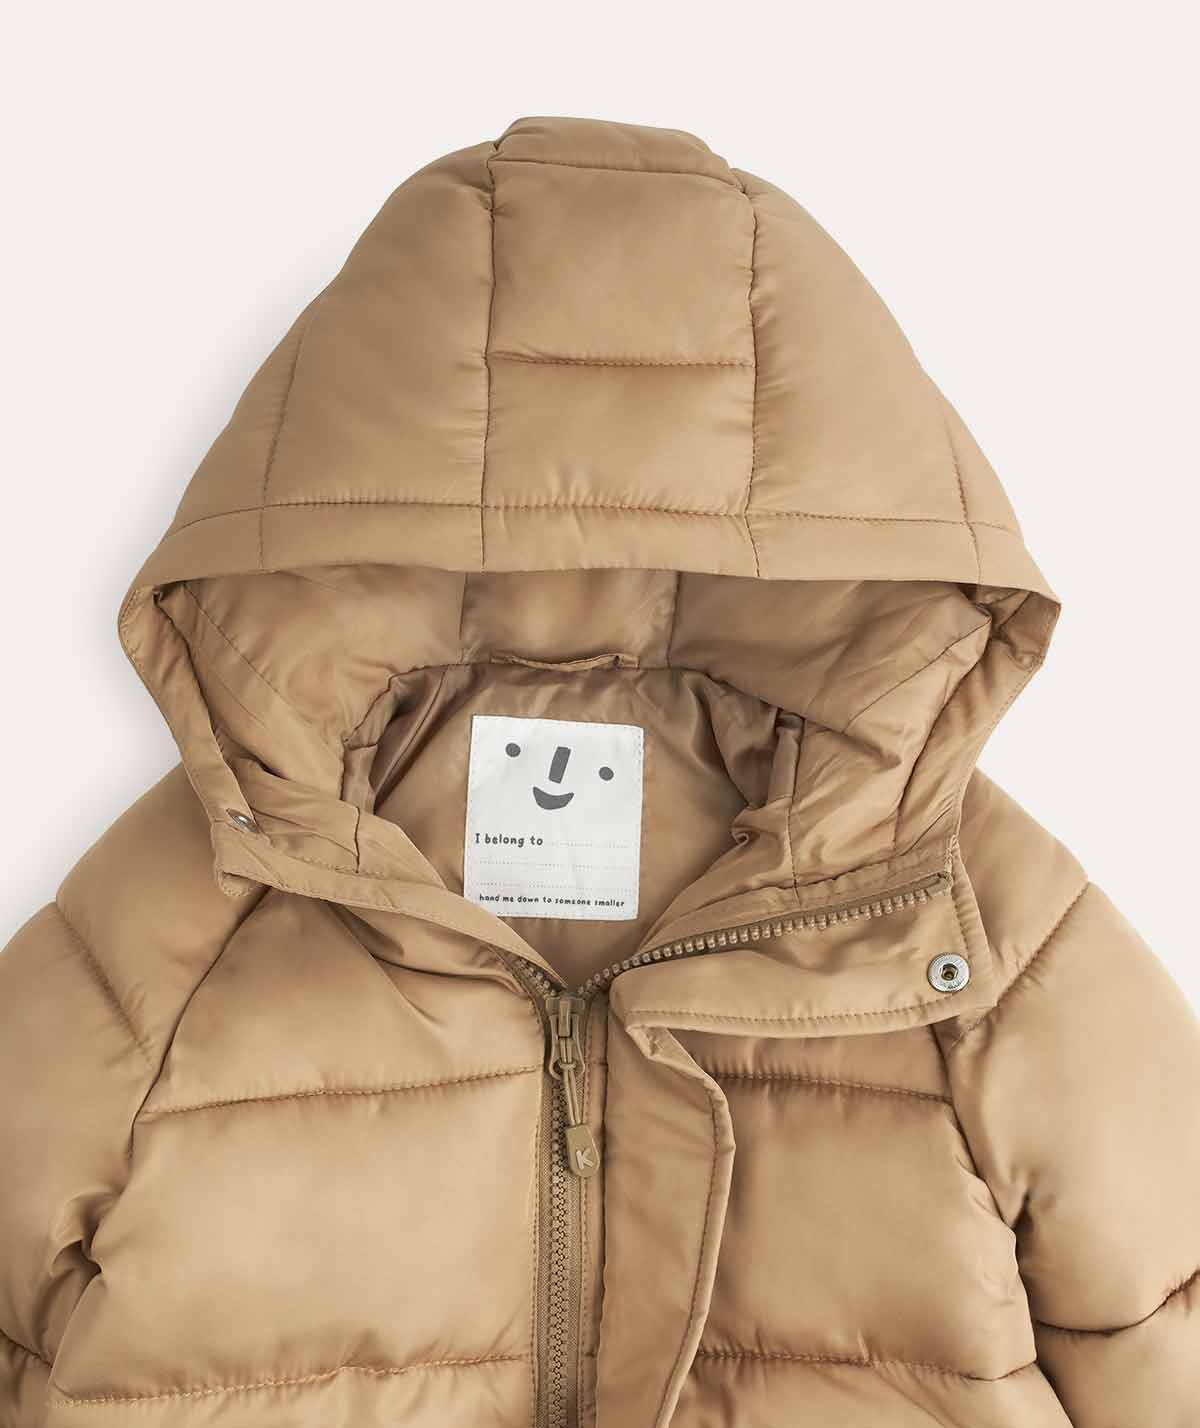 Buy the KIDLY Label Puffer Coat online at KIDLY